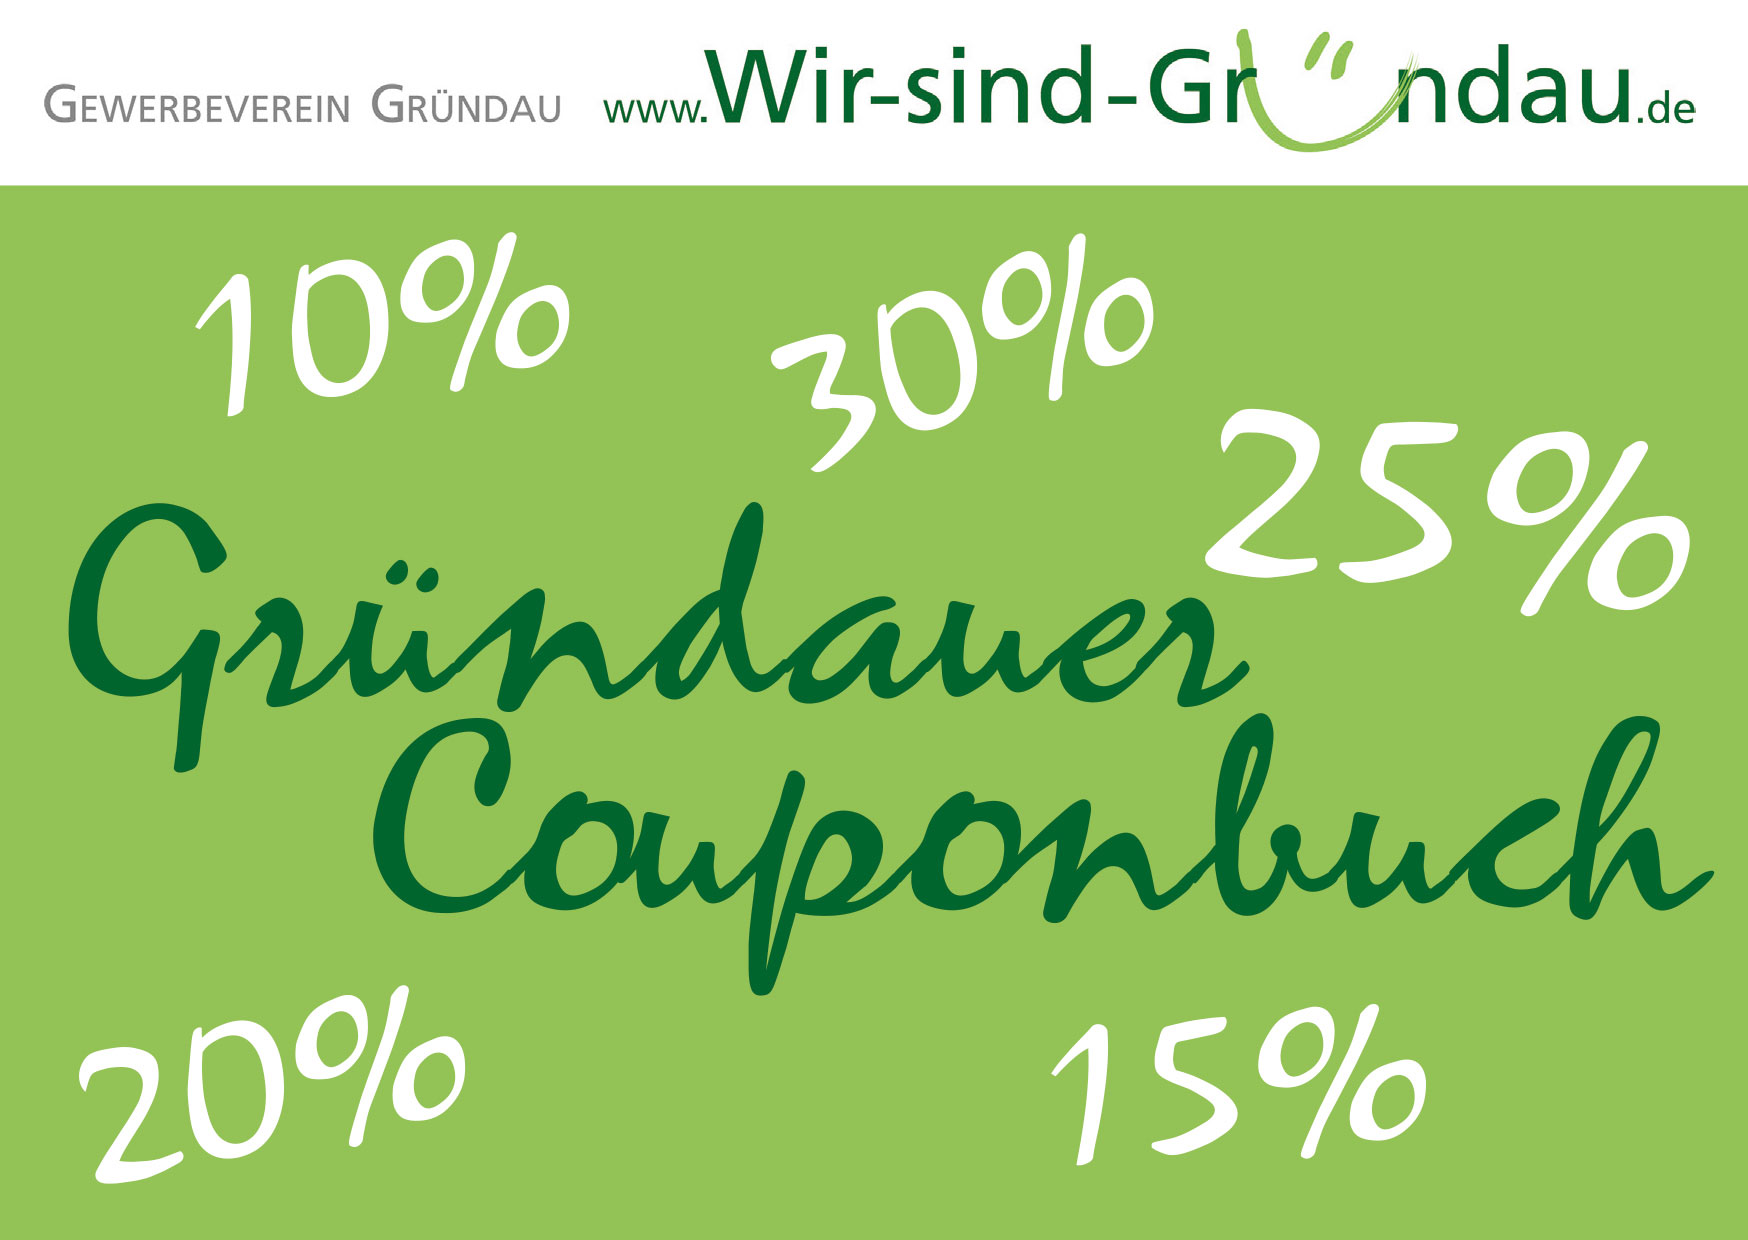 Couponbuch GVG 2017